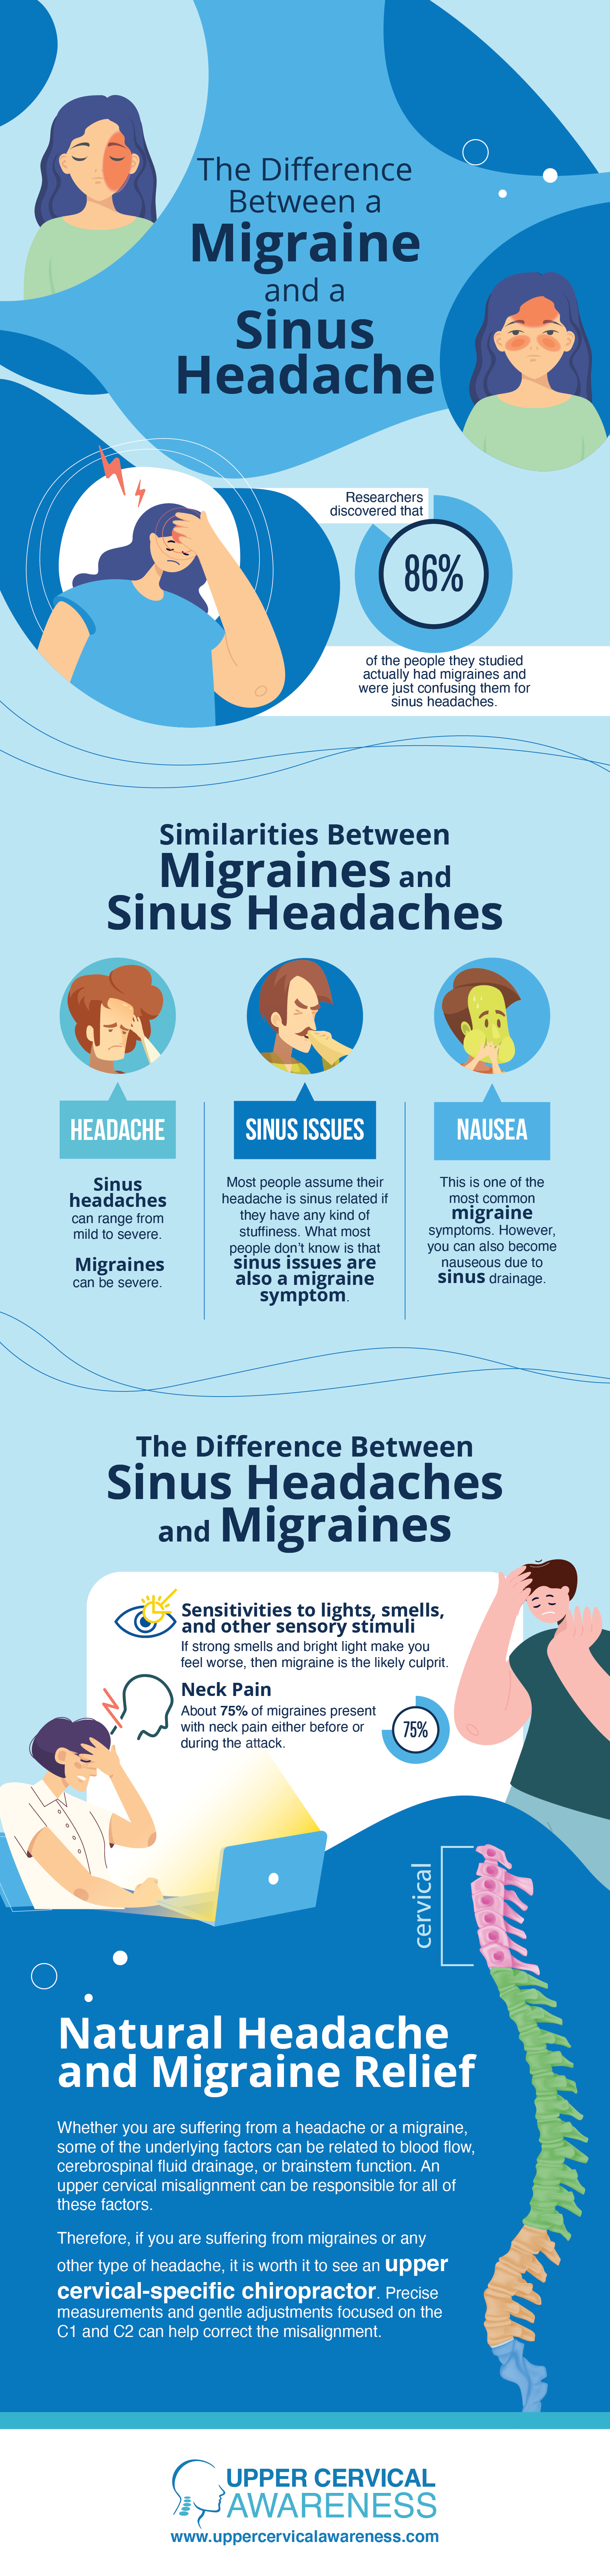 Upper Cervical Chiropractor in Spring Lake Park, migraine relief infographic